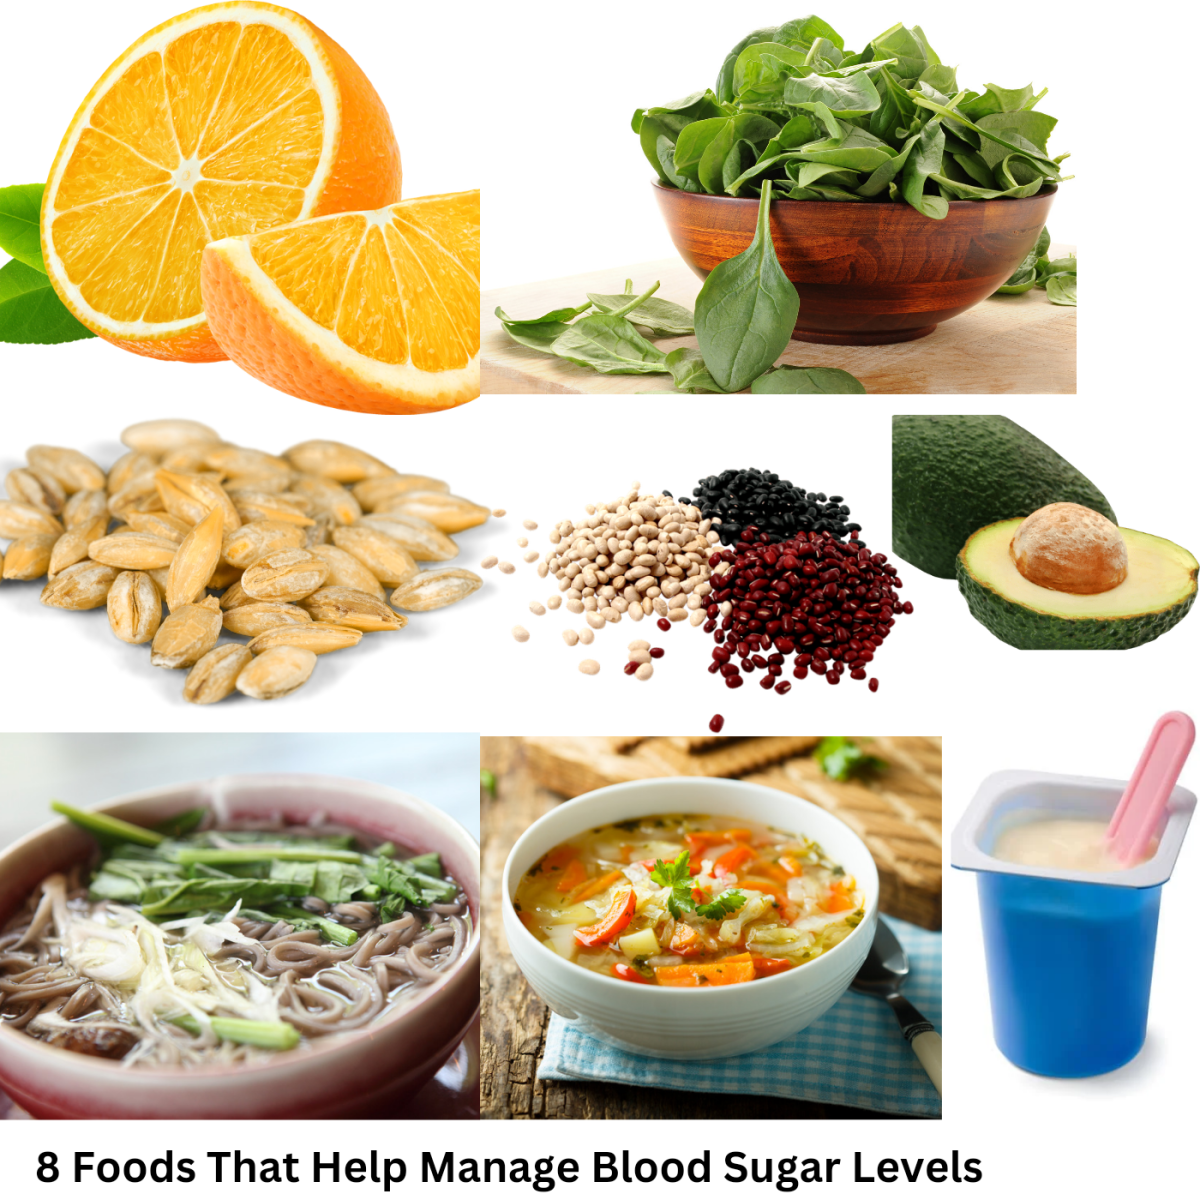 8 Winter Foods That Help Manage Blood Sugar Levels